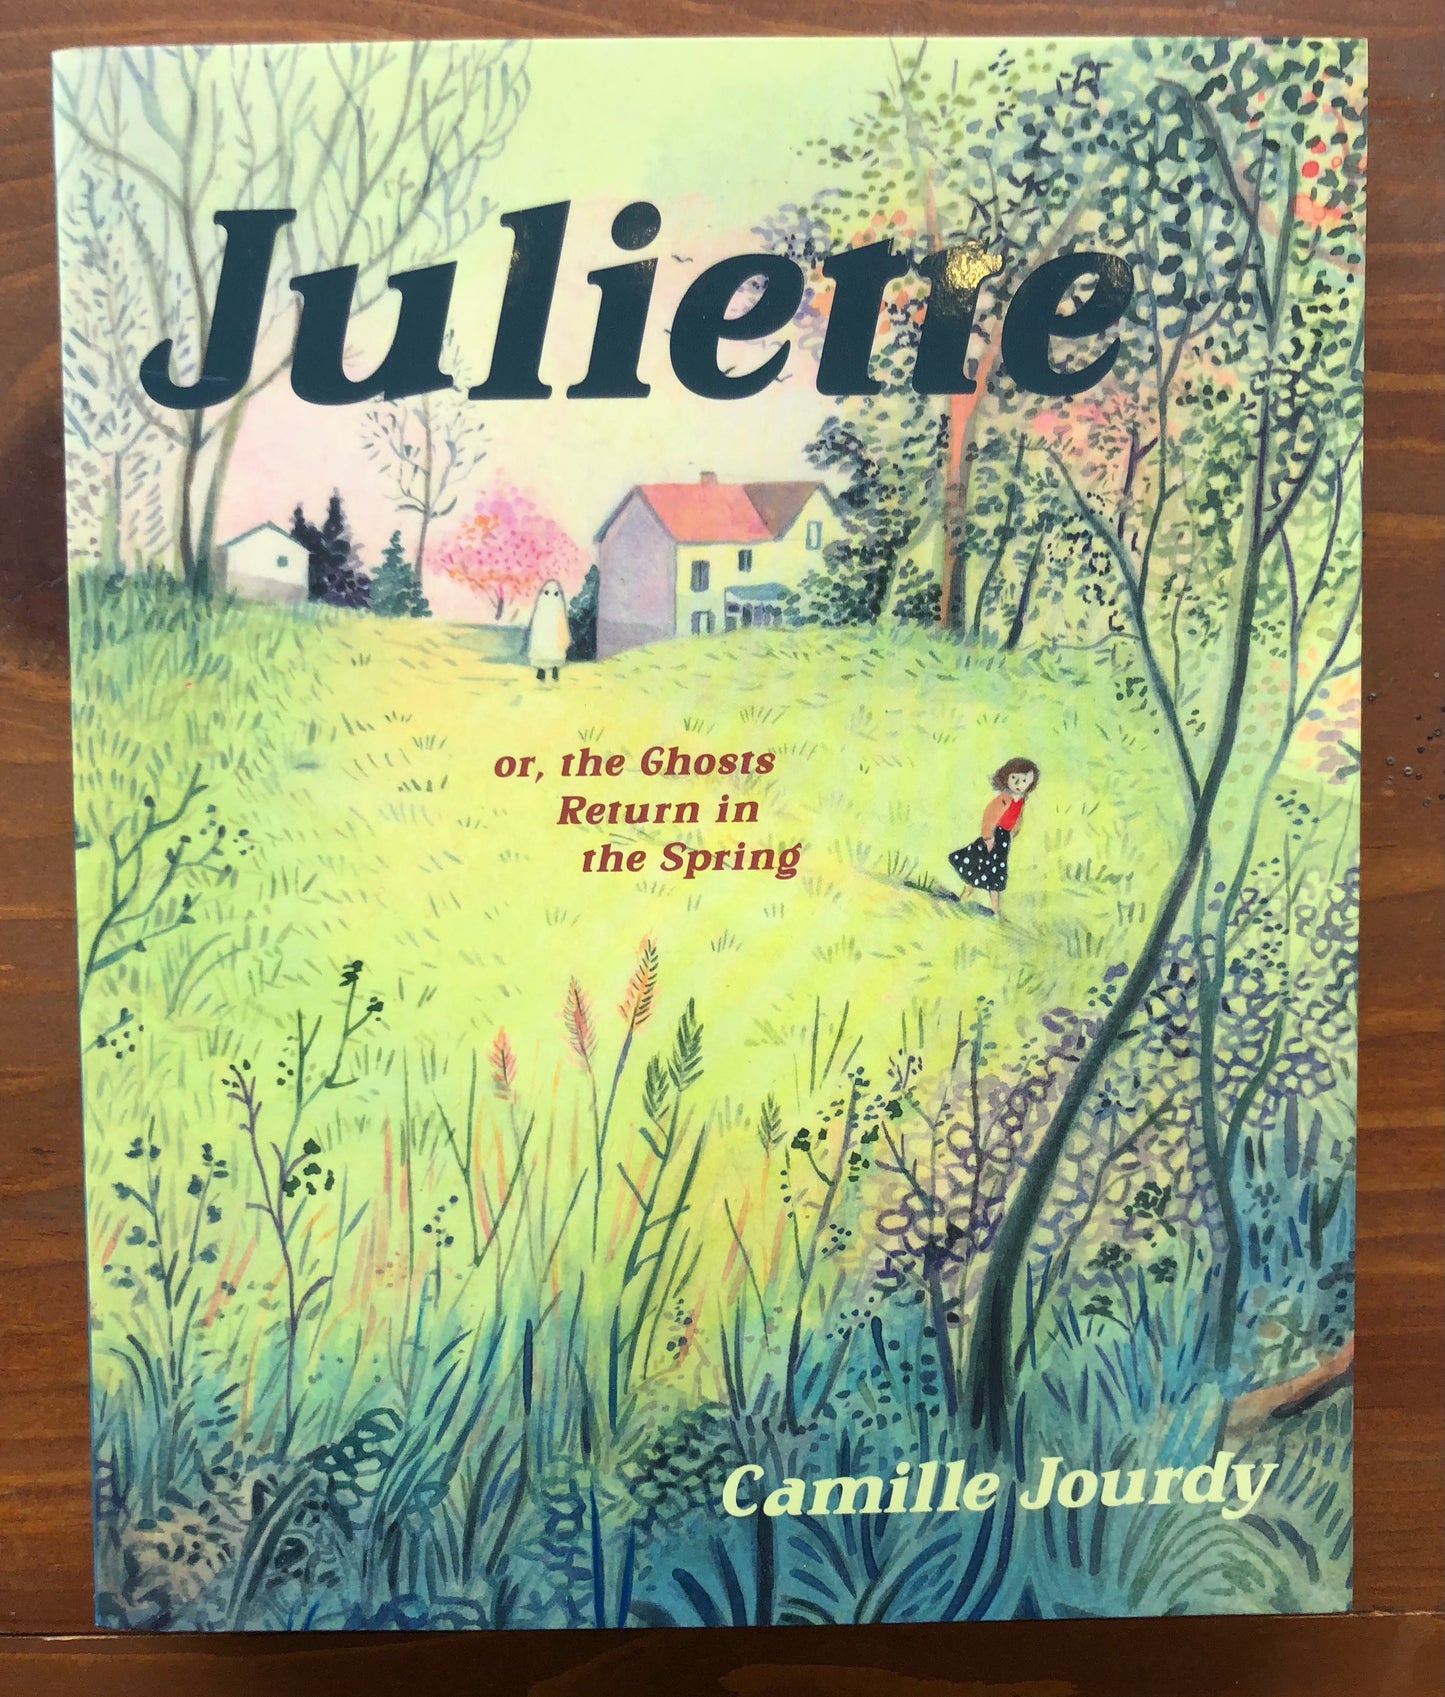 Juliette or, the Ghosts Return in the Spring